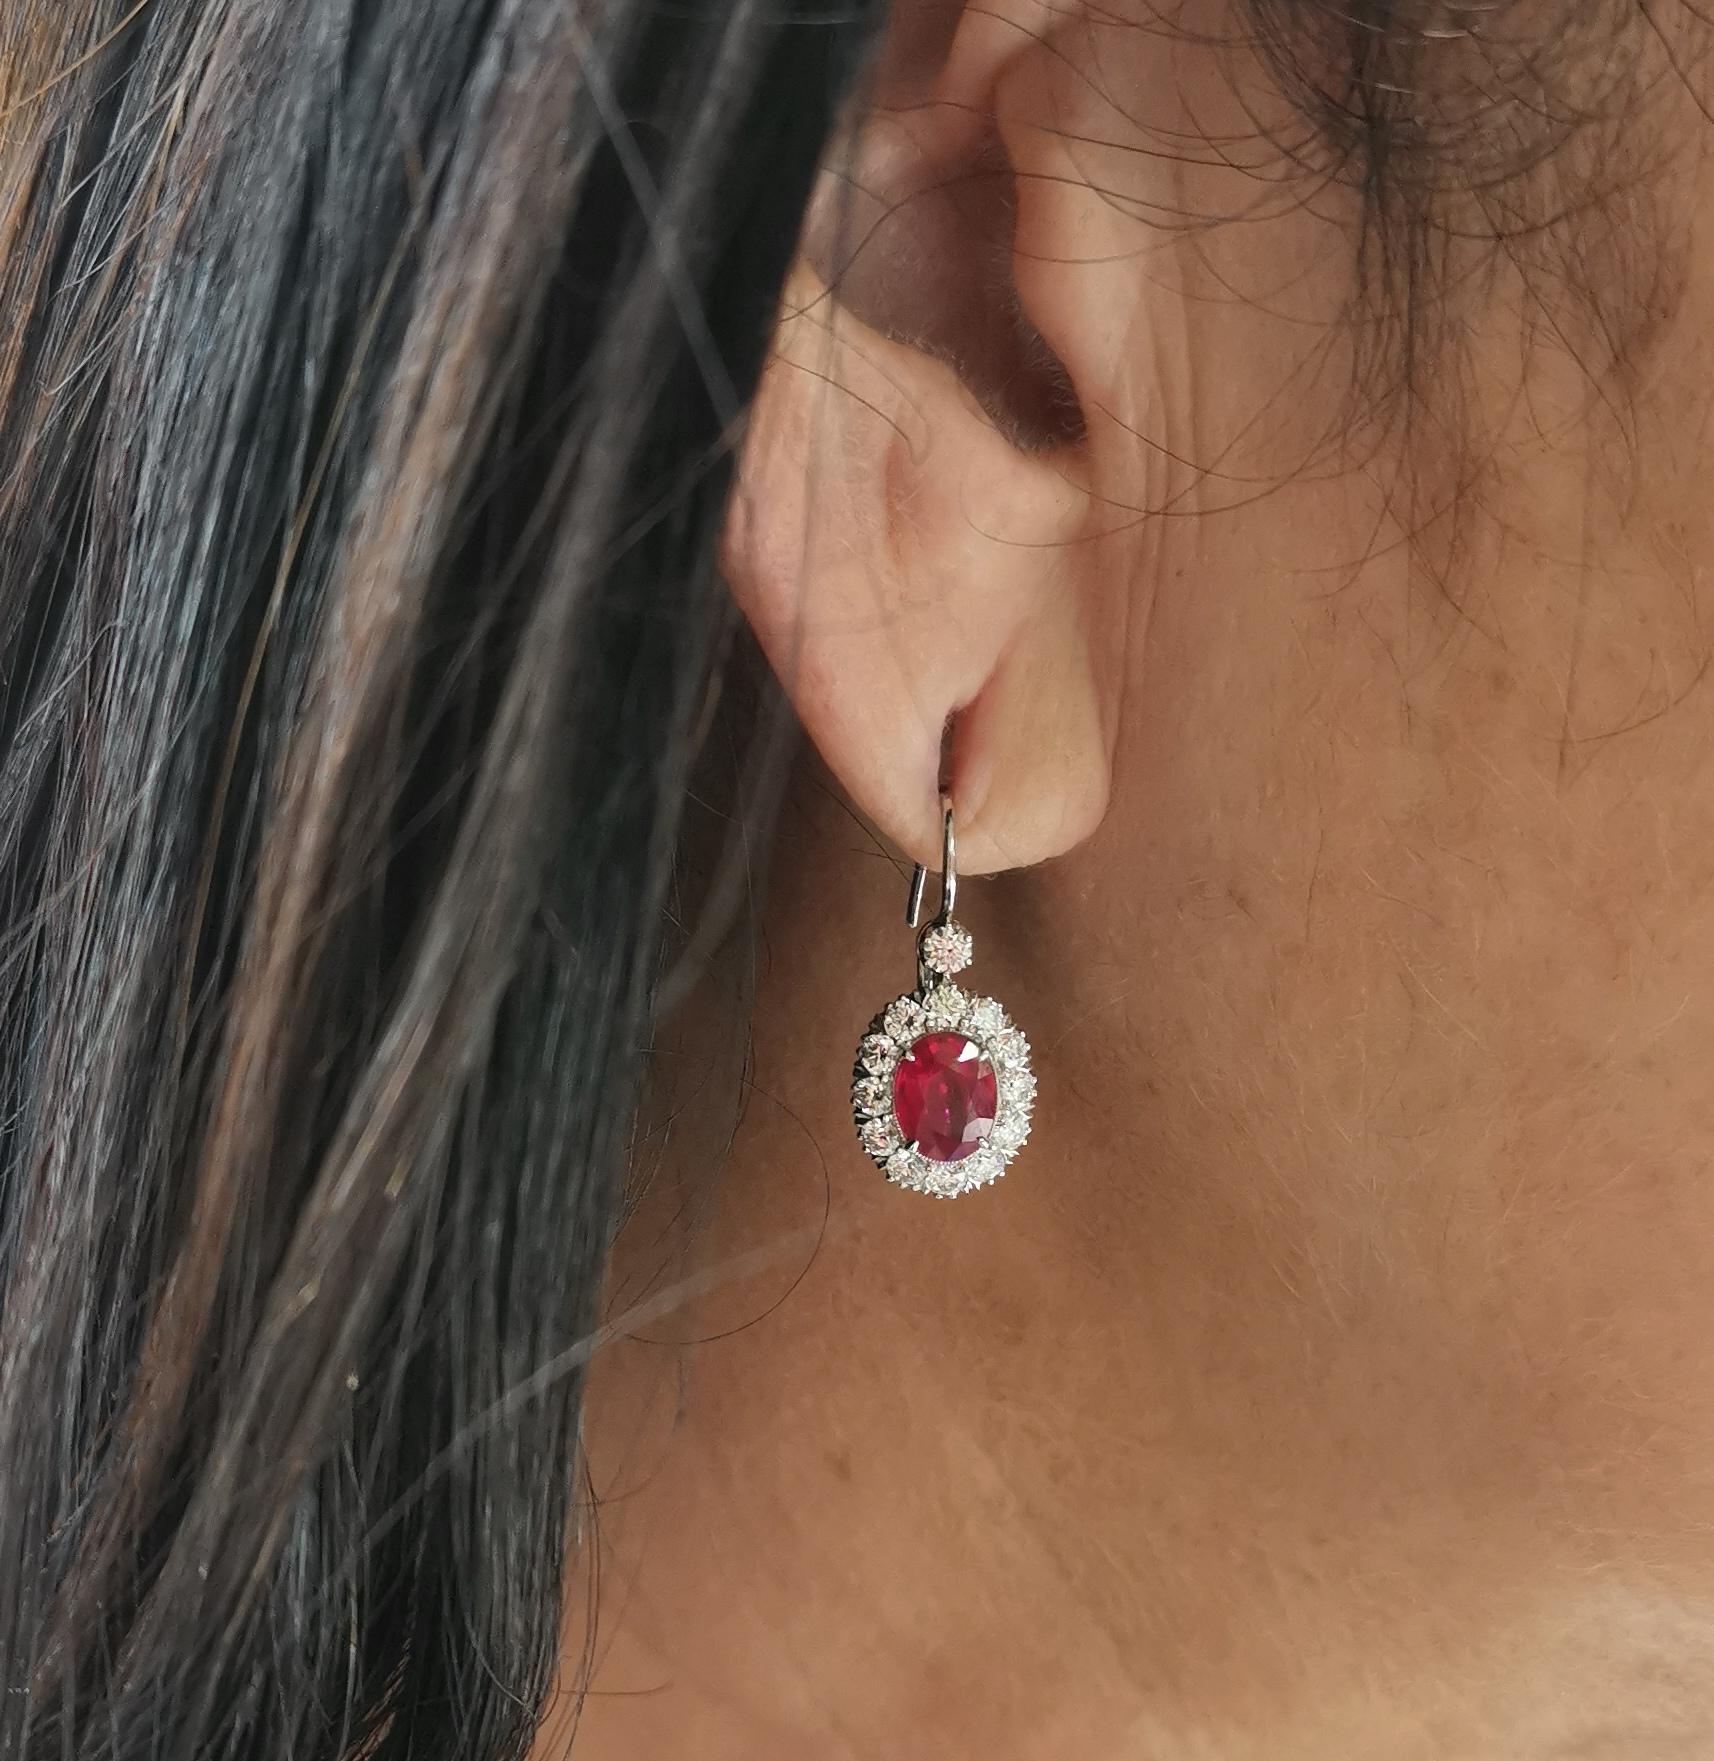 A pair of ruby and diamond cluster earrings, each set with an oval faceted ruby, with a total ruby weight of 2.50ct, surrounded by a cluster of round brilliant-cut diamonds and a single diamond above, with a total diamond weight of 1.23ct, mounted